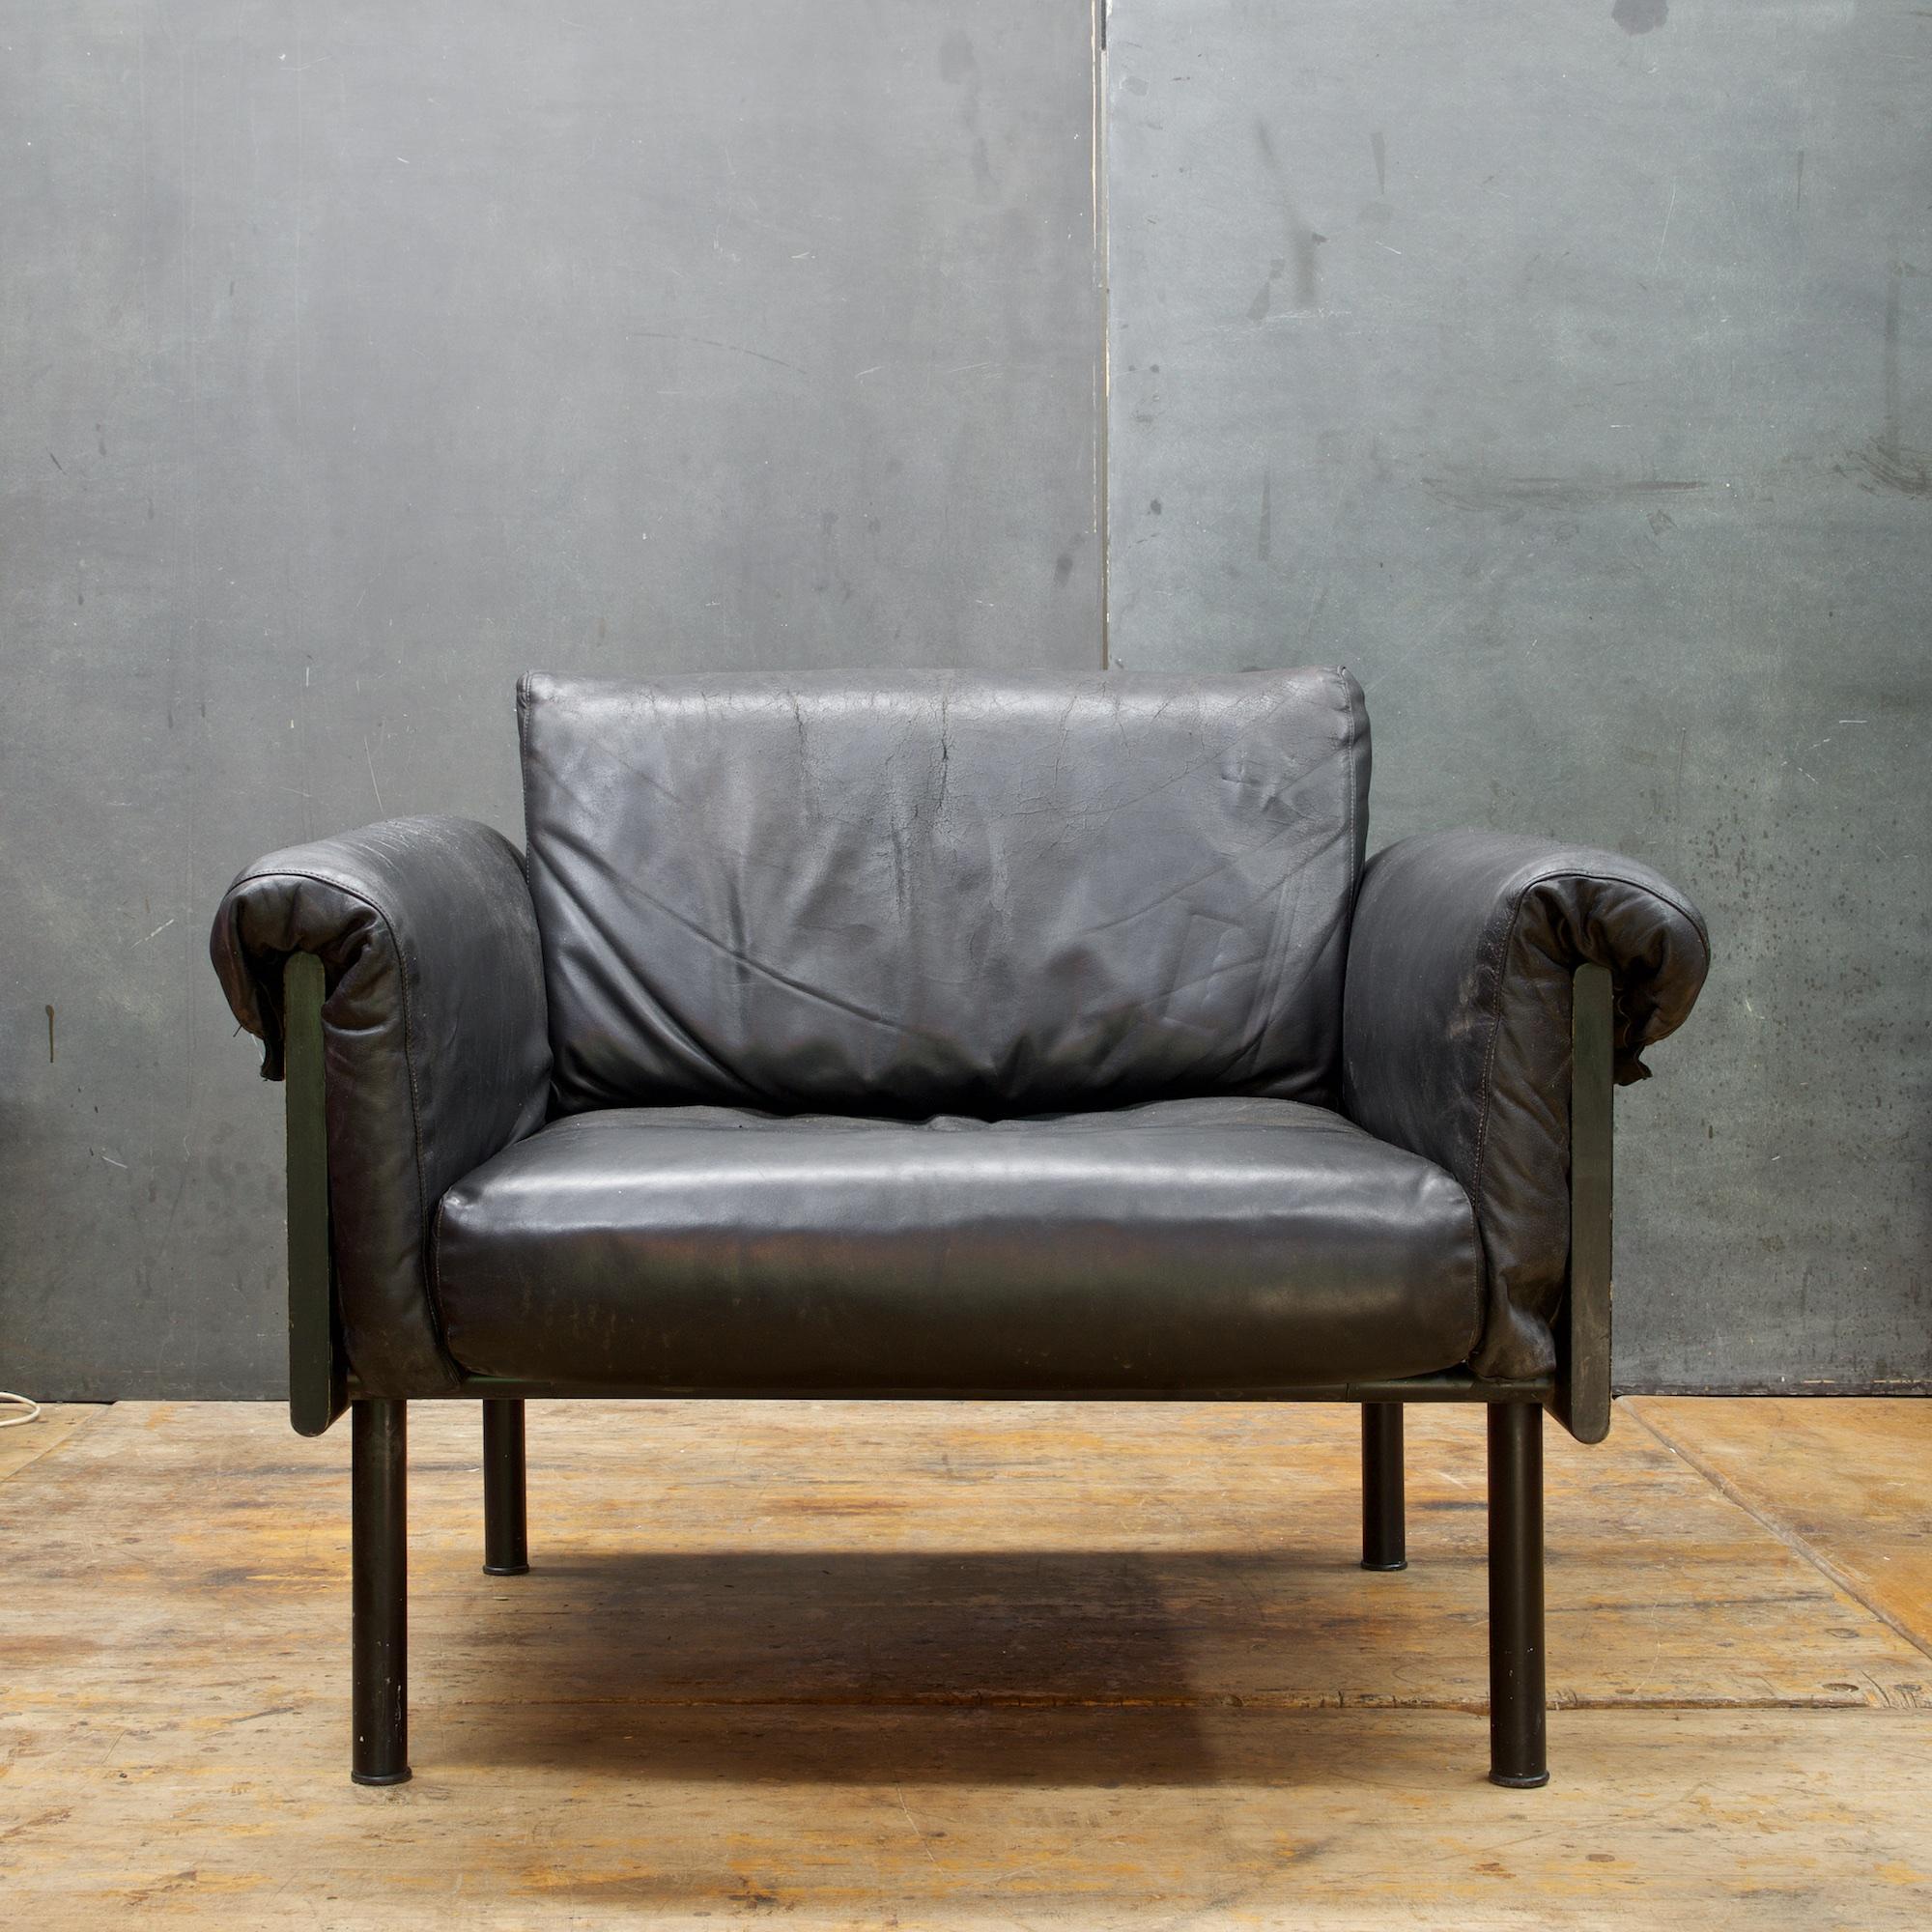 Yrjö Kukkapuro for Haimi Finland, circa 1960s.

Lounge chair designed by Yrjö Kukkapuro and manufactured by Haimi in Finland during the 1960s. The chair is crafted from black enameled wood with black metal legs, and upholstered in black